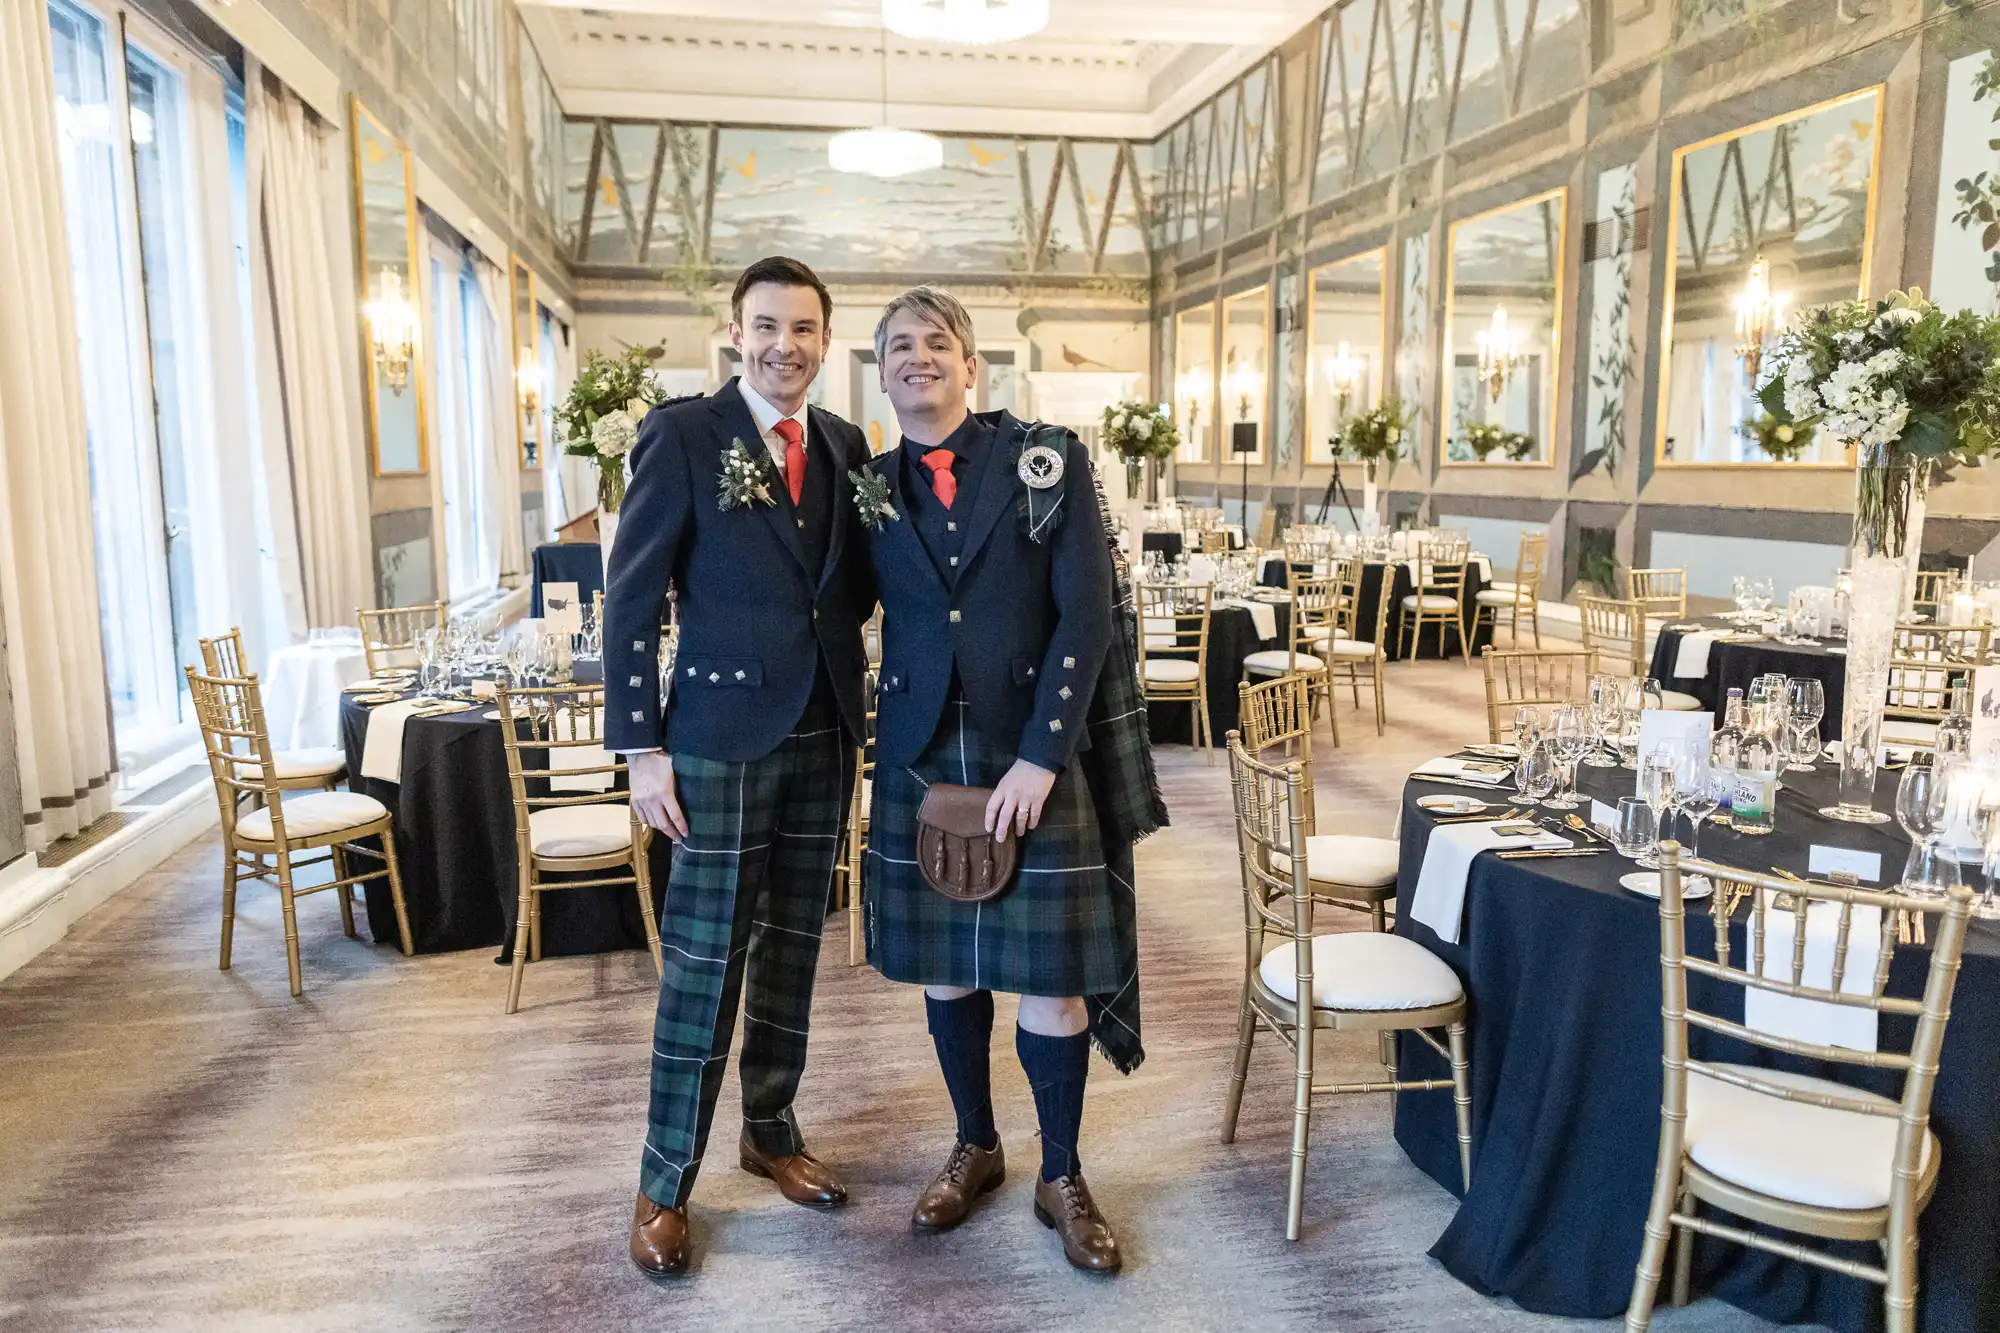 Two men in traditional Scottish kilts stand smiling in an elegantly decorated banquet hall with set tables and gold chiavari chairs.